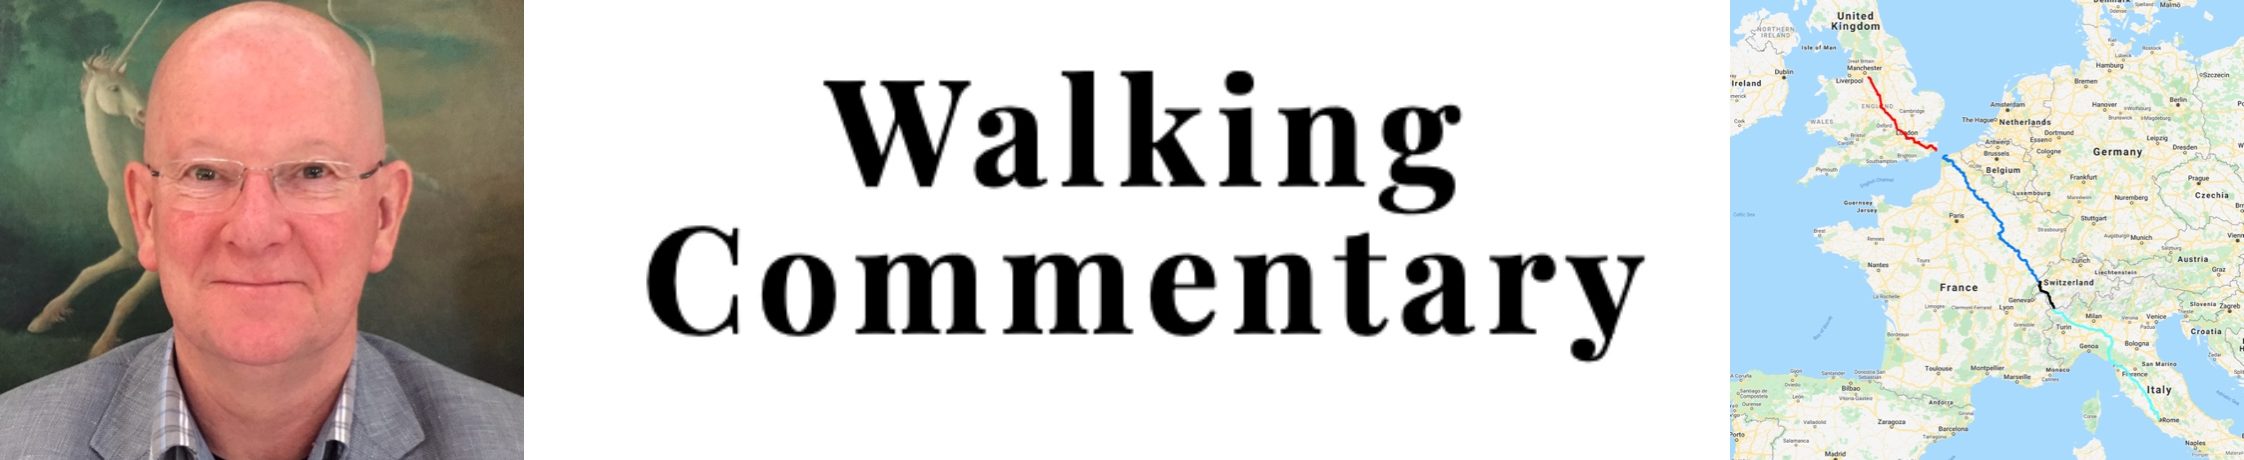 Walking Commentary